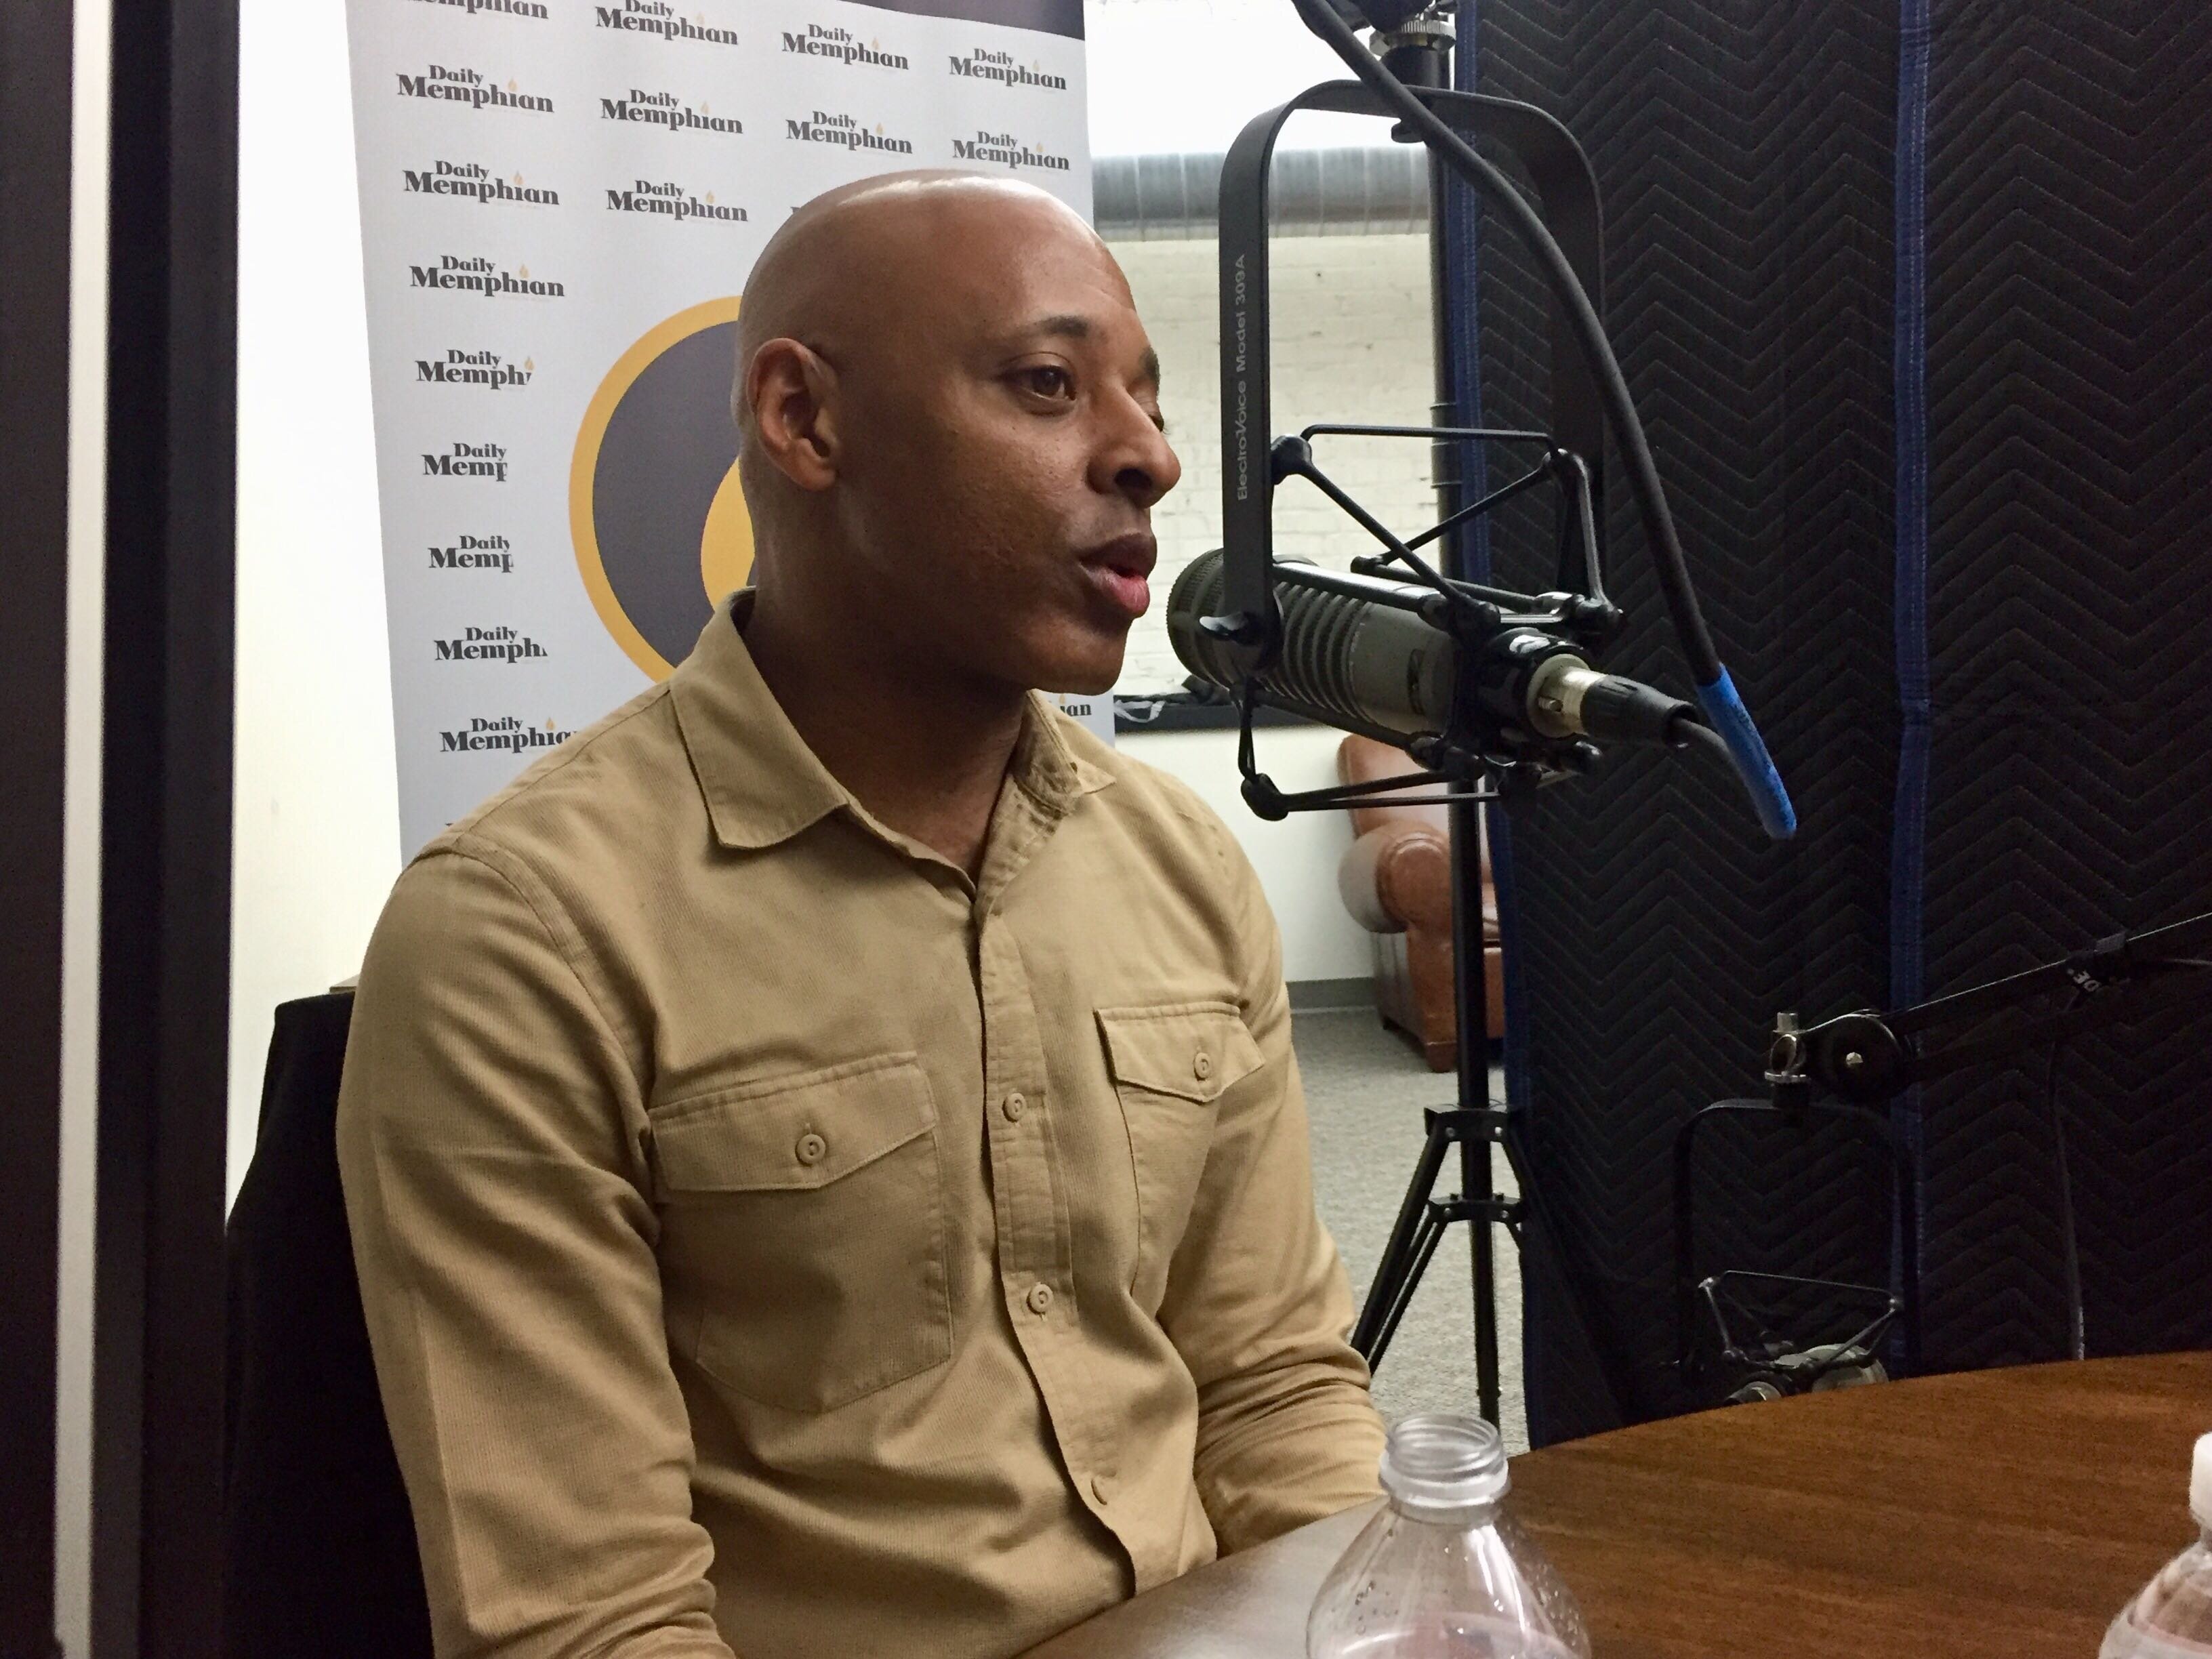 Andre Jones with Jones Urban Development discuss local efforts to support emerging minority- and women-owned real estate developers on the On the Ground Podcast. (Natalie Van Gundy)